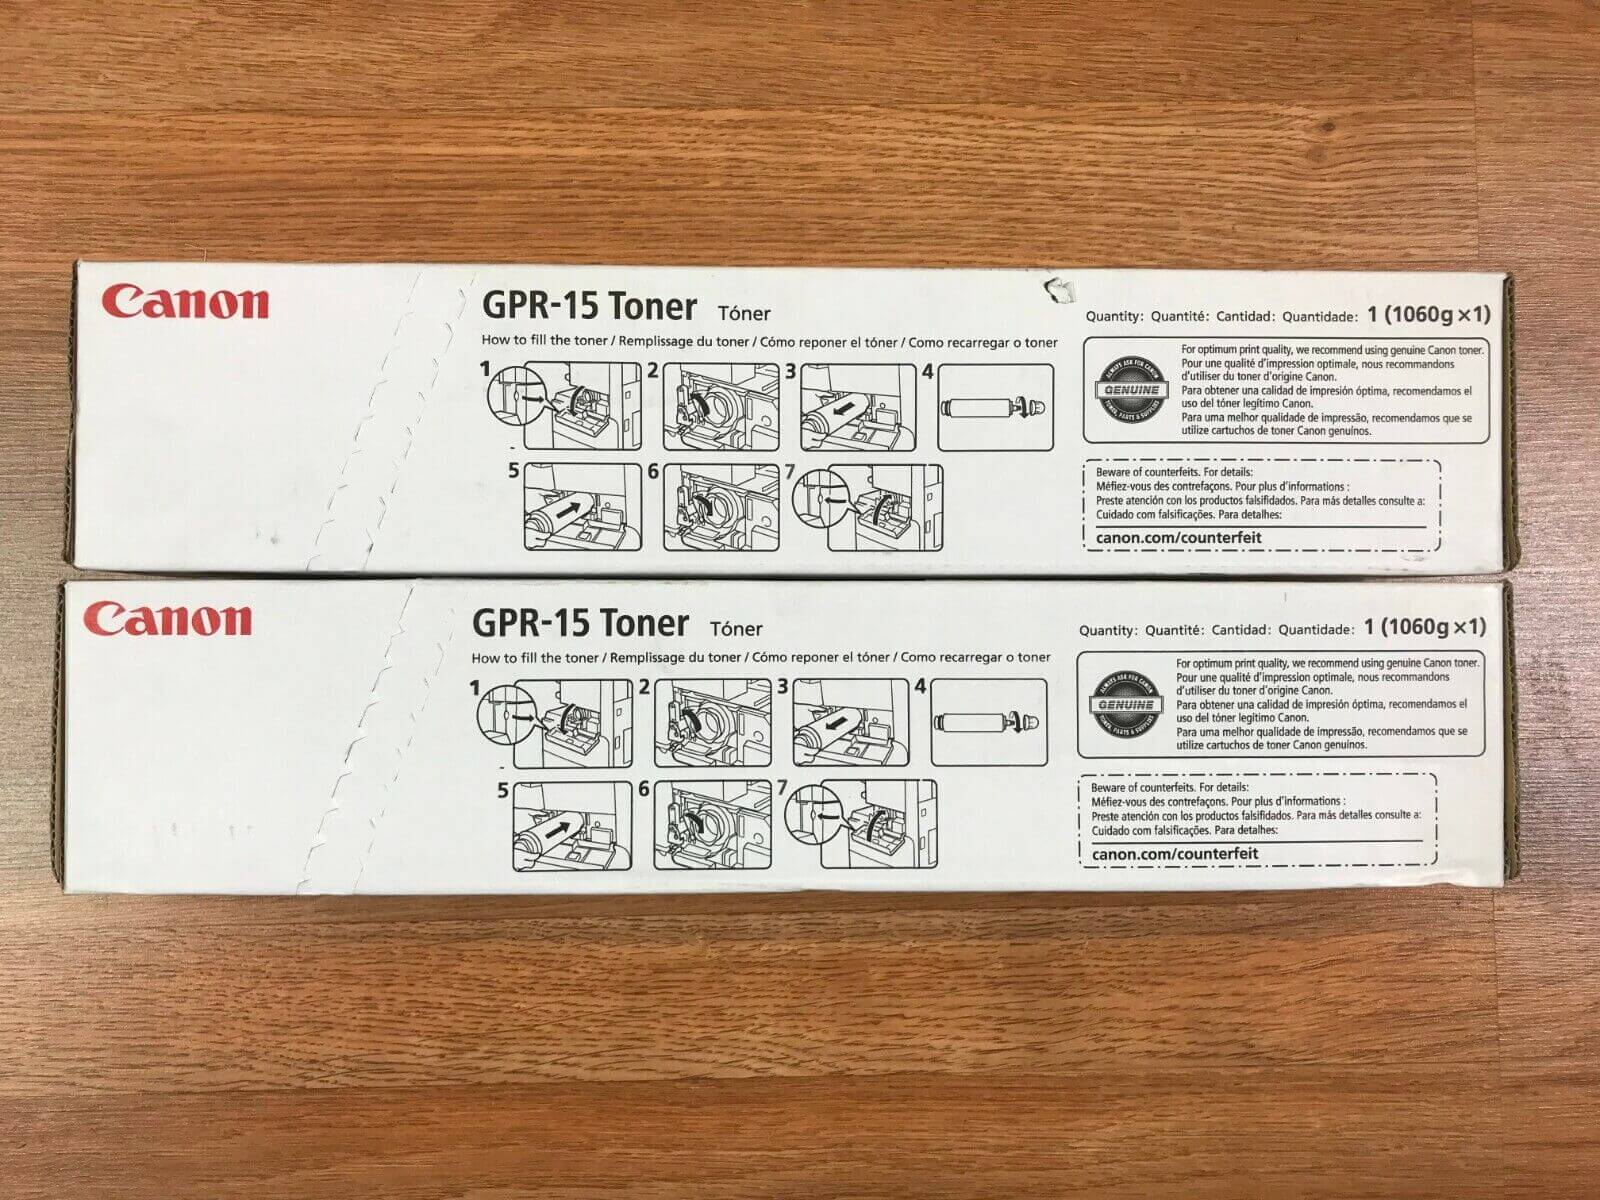 Lot Of 2 Canon GPR-15 Blk Toner For IR 2230 2270 2830 2870 Same Day Shipping!!!! - copier-clearance-center